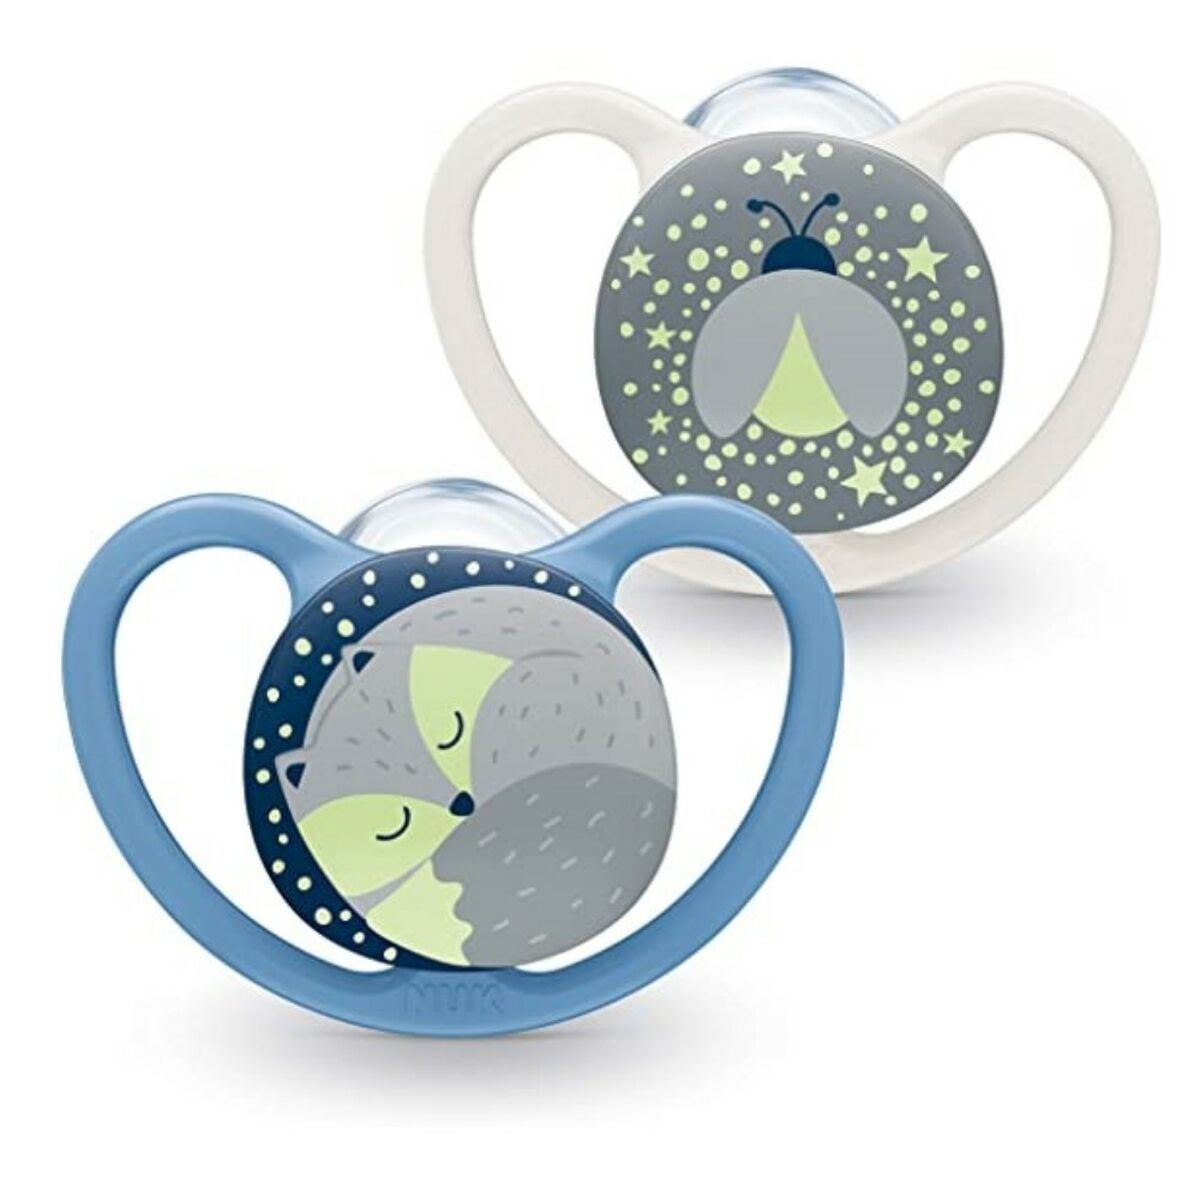 Pacifier Nuk Space Night (2 Units) (Refurbished A+)